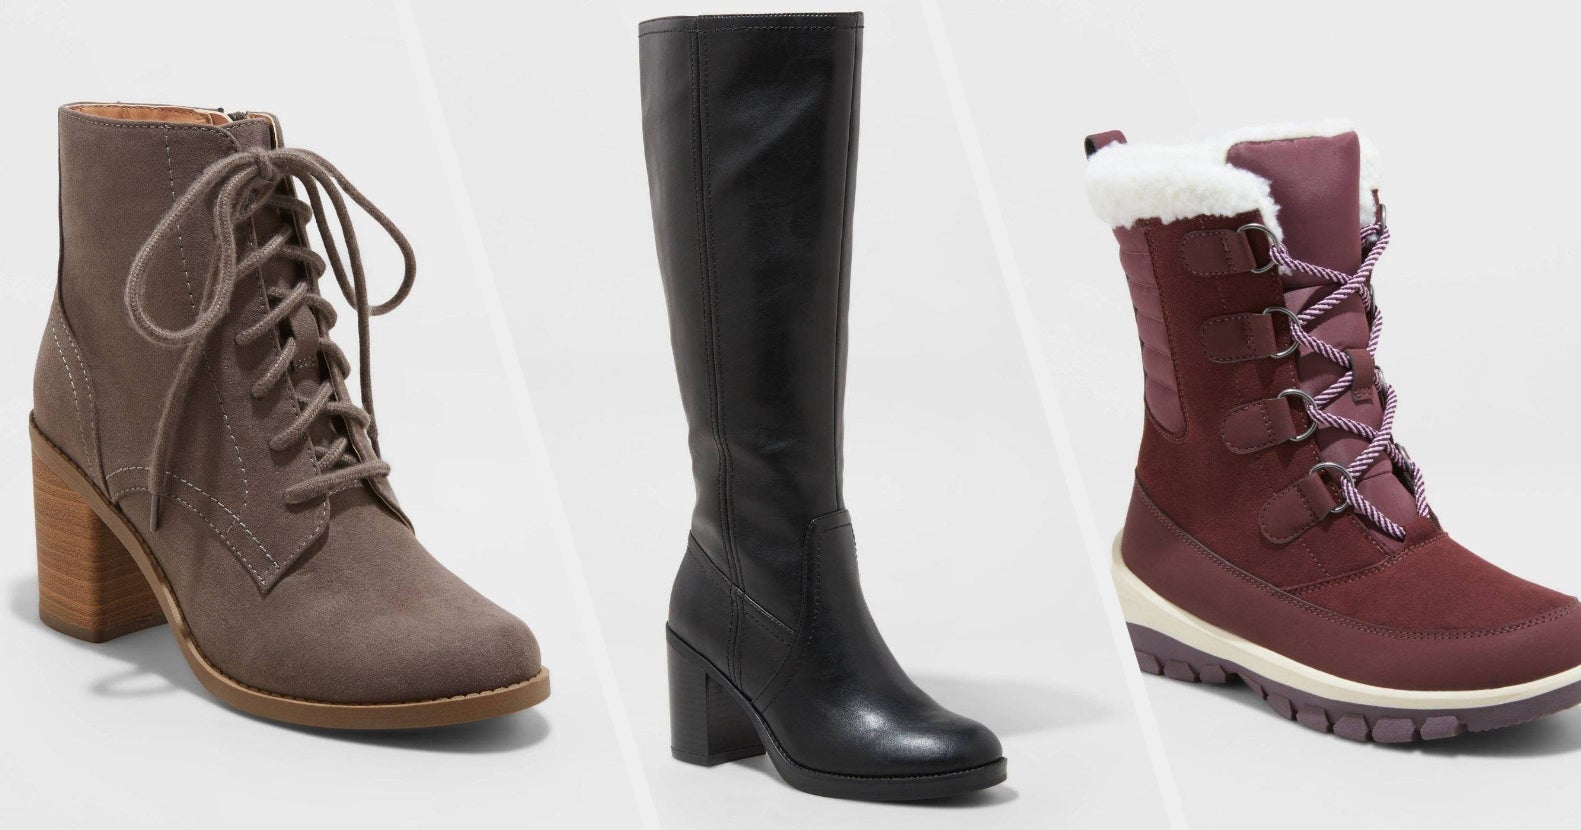 31 Pairs Of Gorgeous Boots From Target You’ll Want To Wear All Year Long